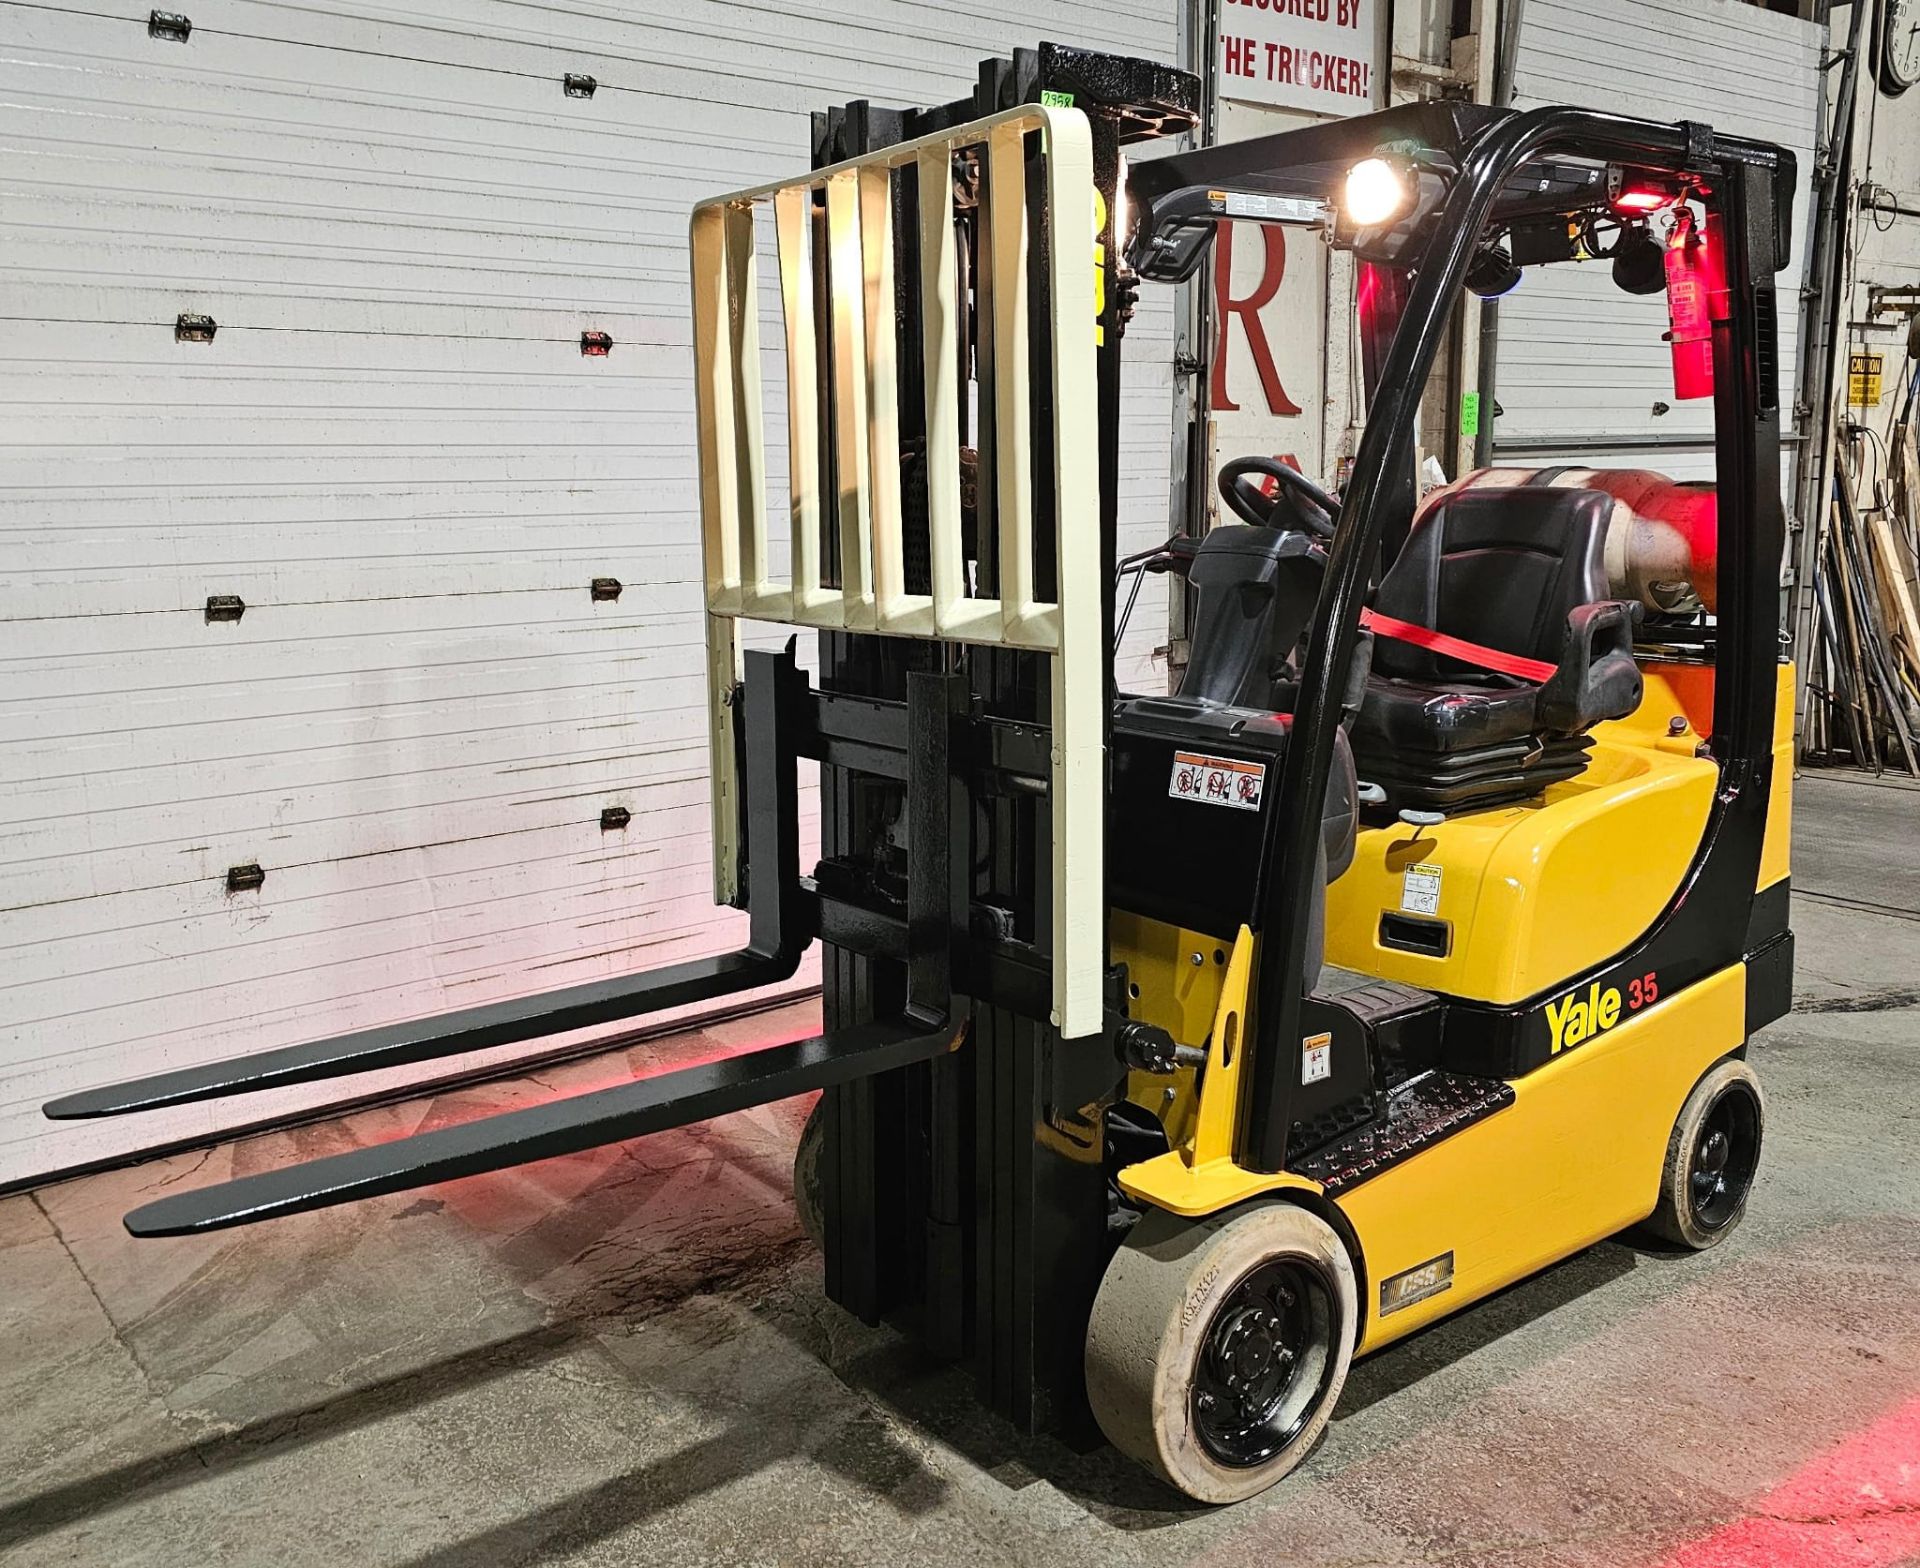 2017 Yale 3,500lbs capacity LPG (PROPANE) Forklift with sideshift stage 3 mast and non marking tires - Image 2 of 6